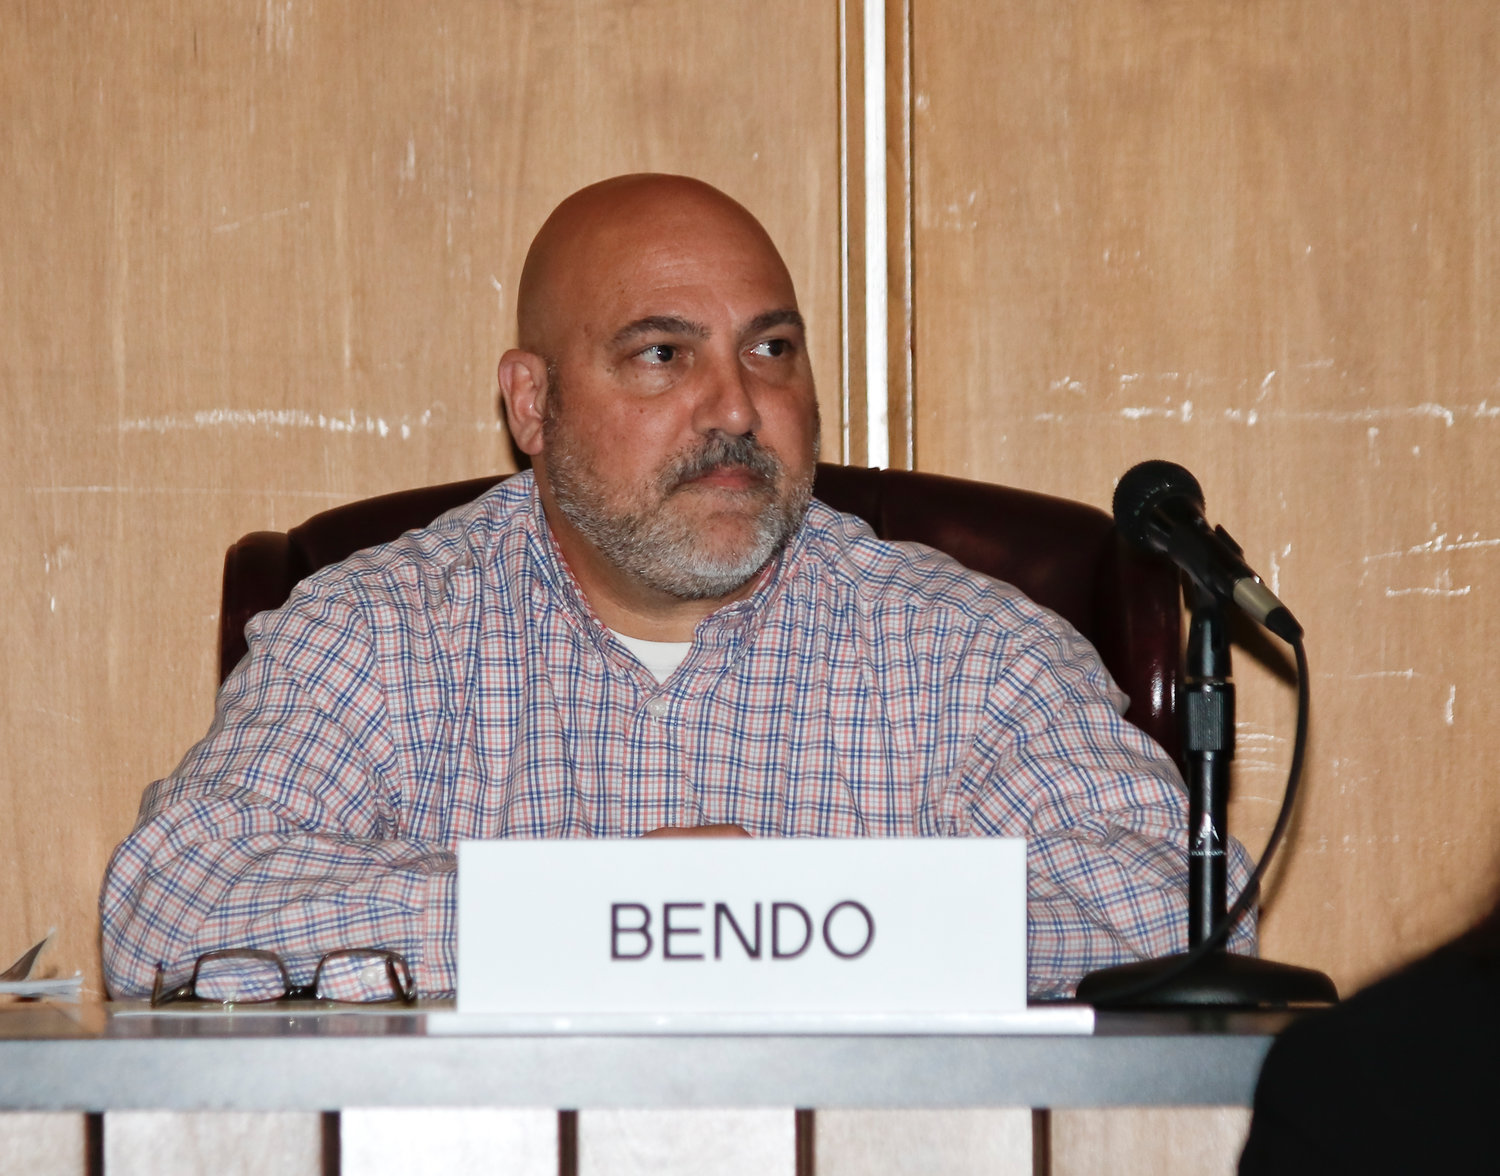 City Council Vice President John Bendo called for the special meeting on Oct. 11 to rescind the city’s Sept. 23 response to a draft audit issued by State Comptroller Tom DiNapoli’s office in late August.